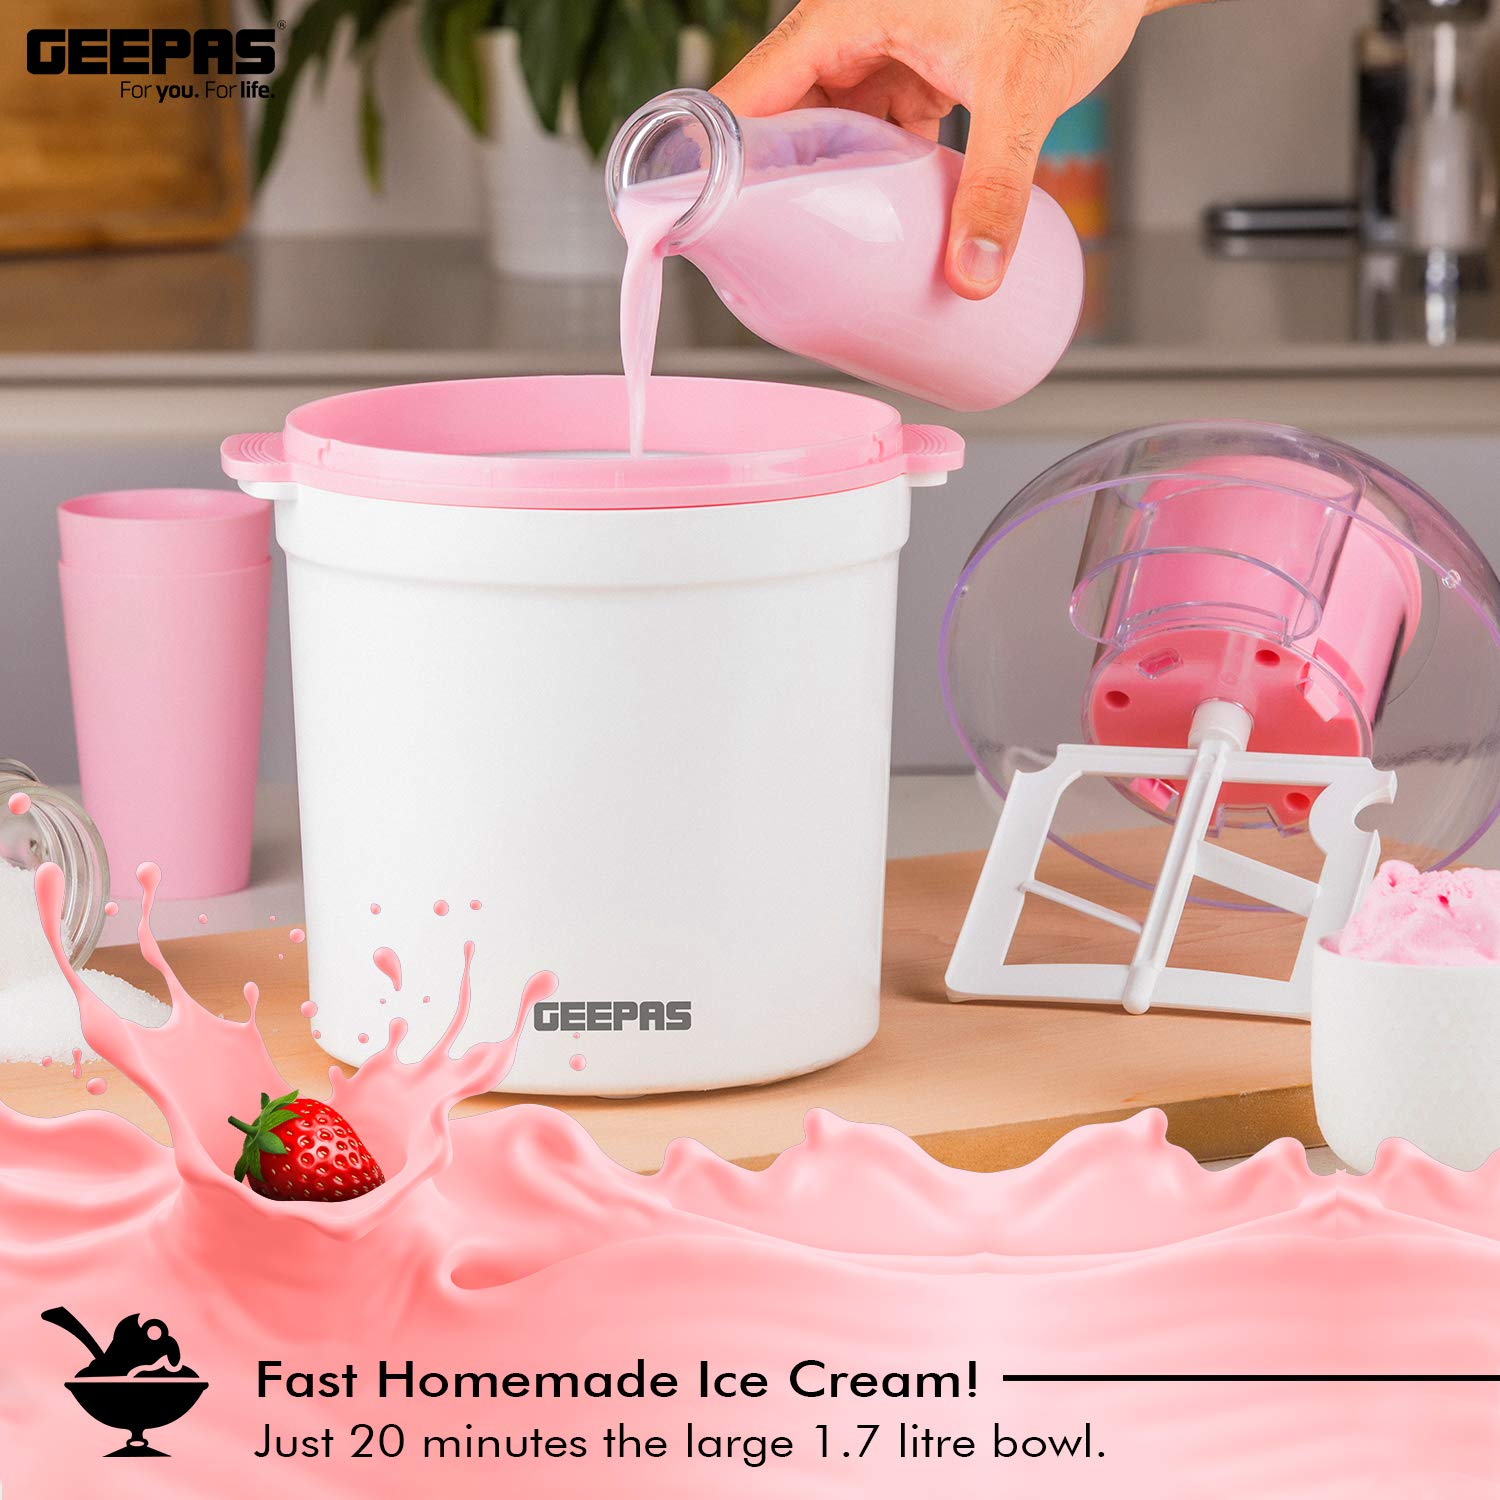 Geepas Ice Cream Maker Machine Makes Delicious Homemade Soft Ice Cream, Gelato, Frozen Yoghurt & Sorbet |1.7L Aluminum Removable Inner Bowl | Detachable Mixing Paddle | 1 Year Warranty